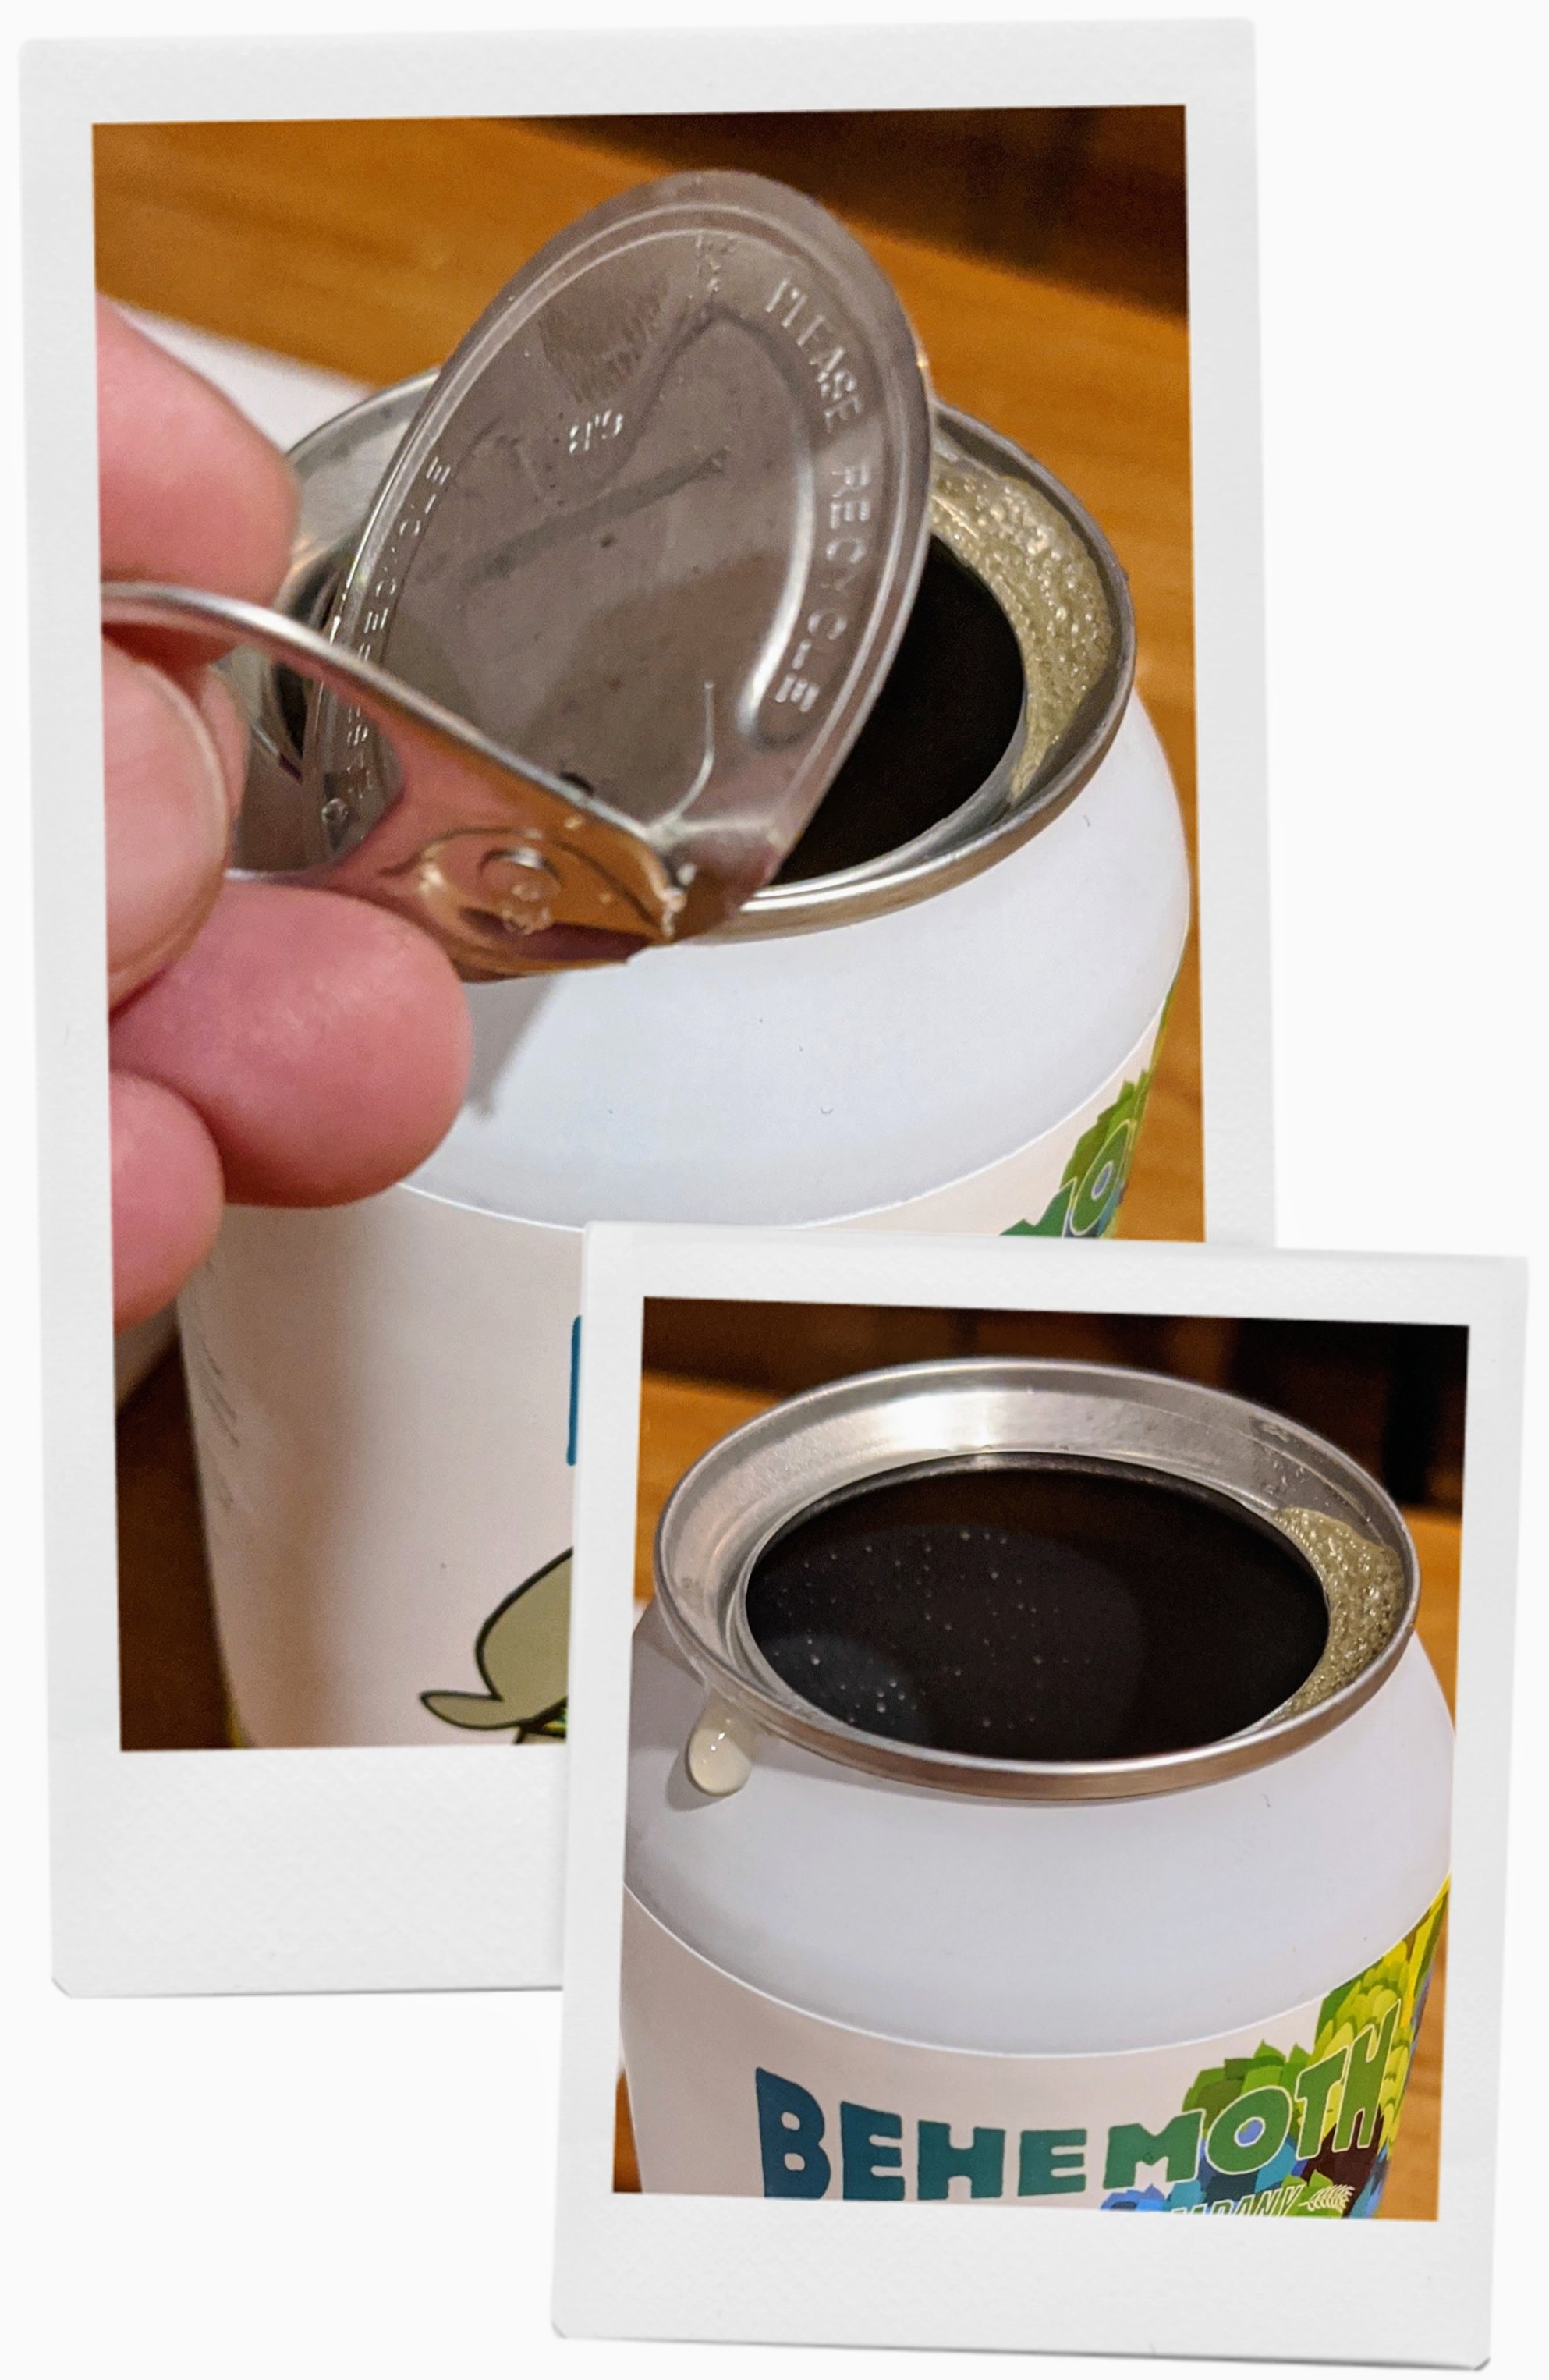 'Innovative' beer can opening collage